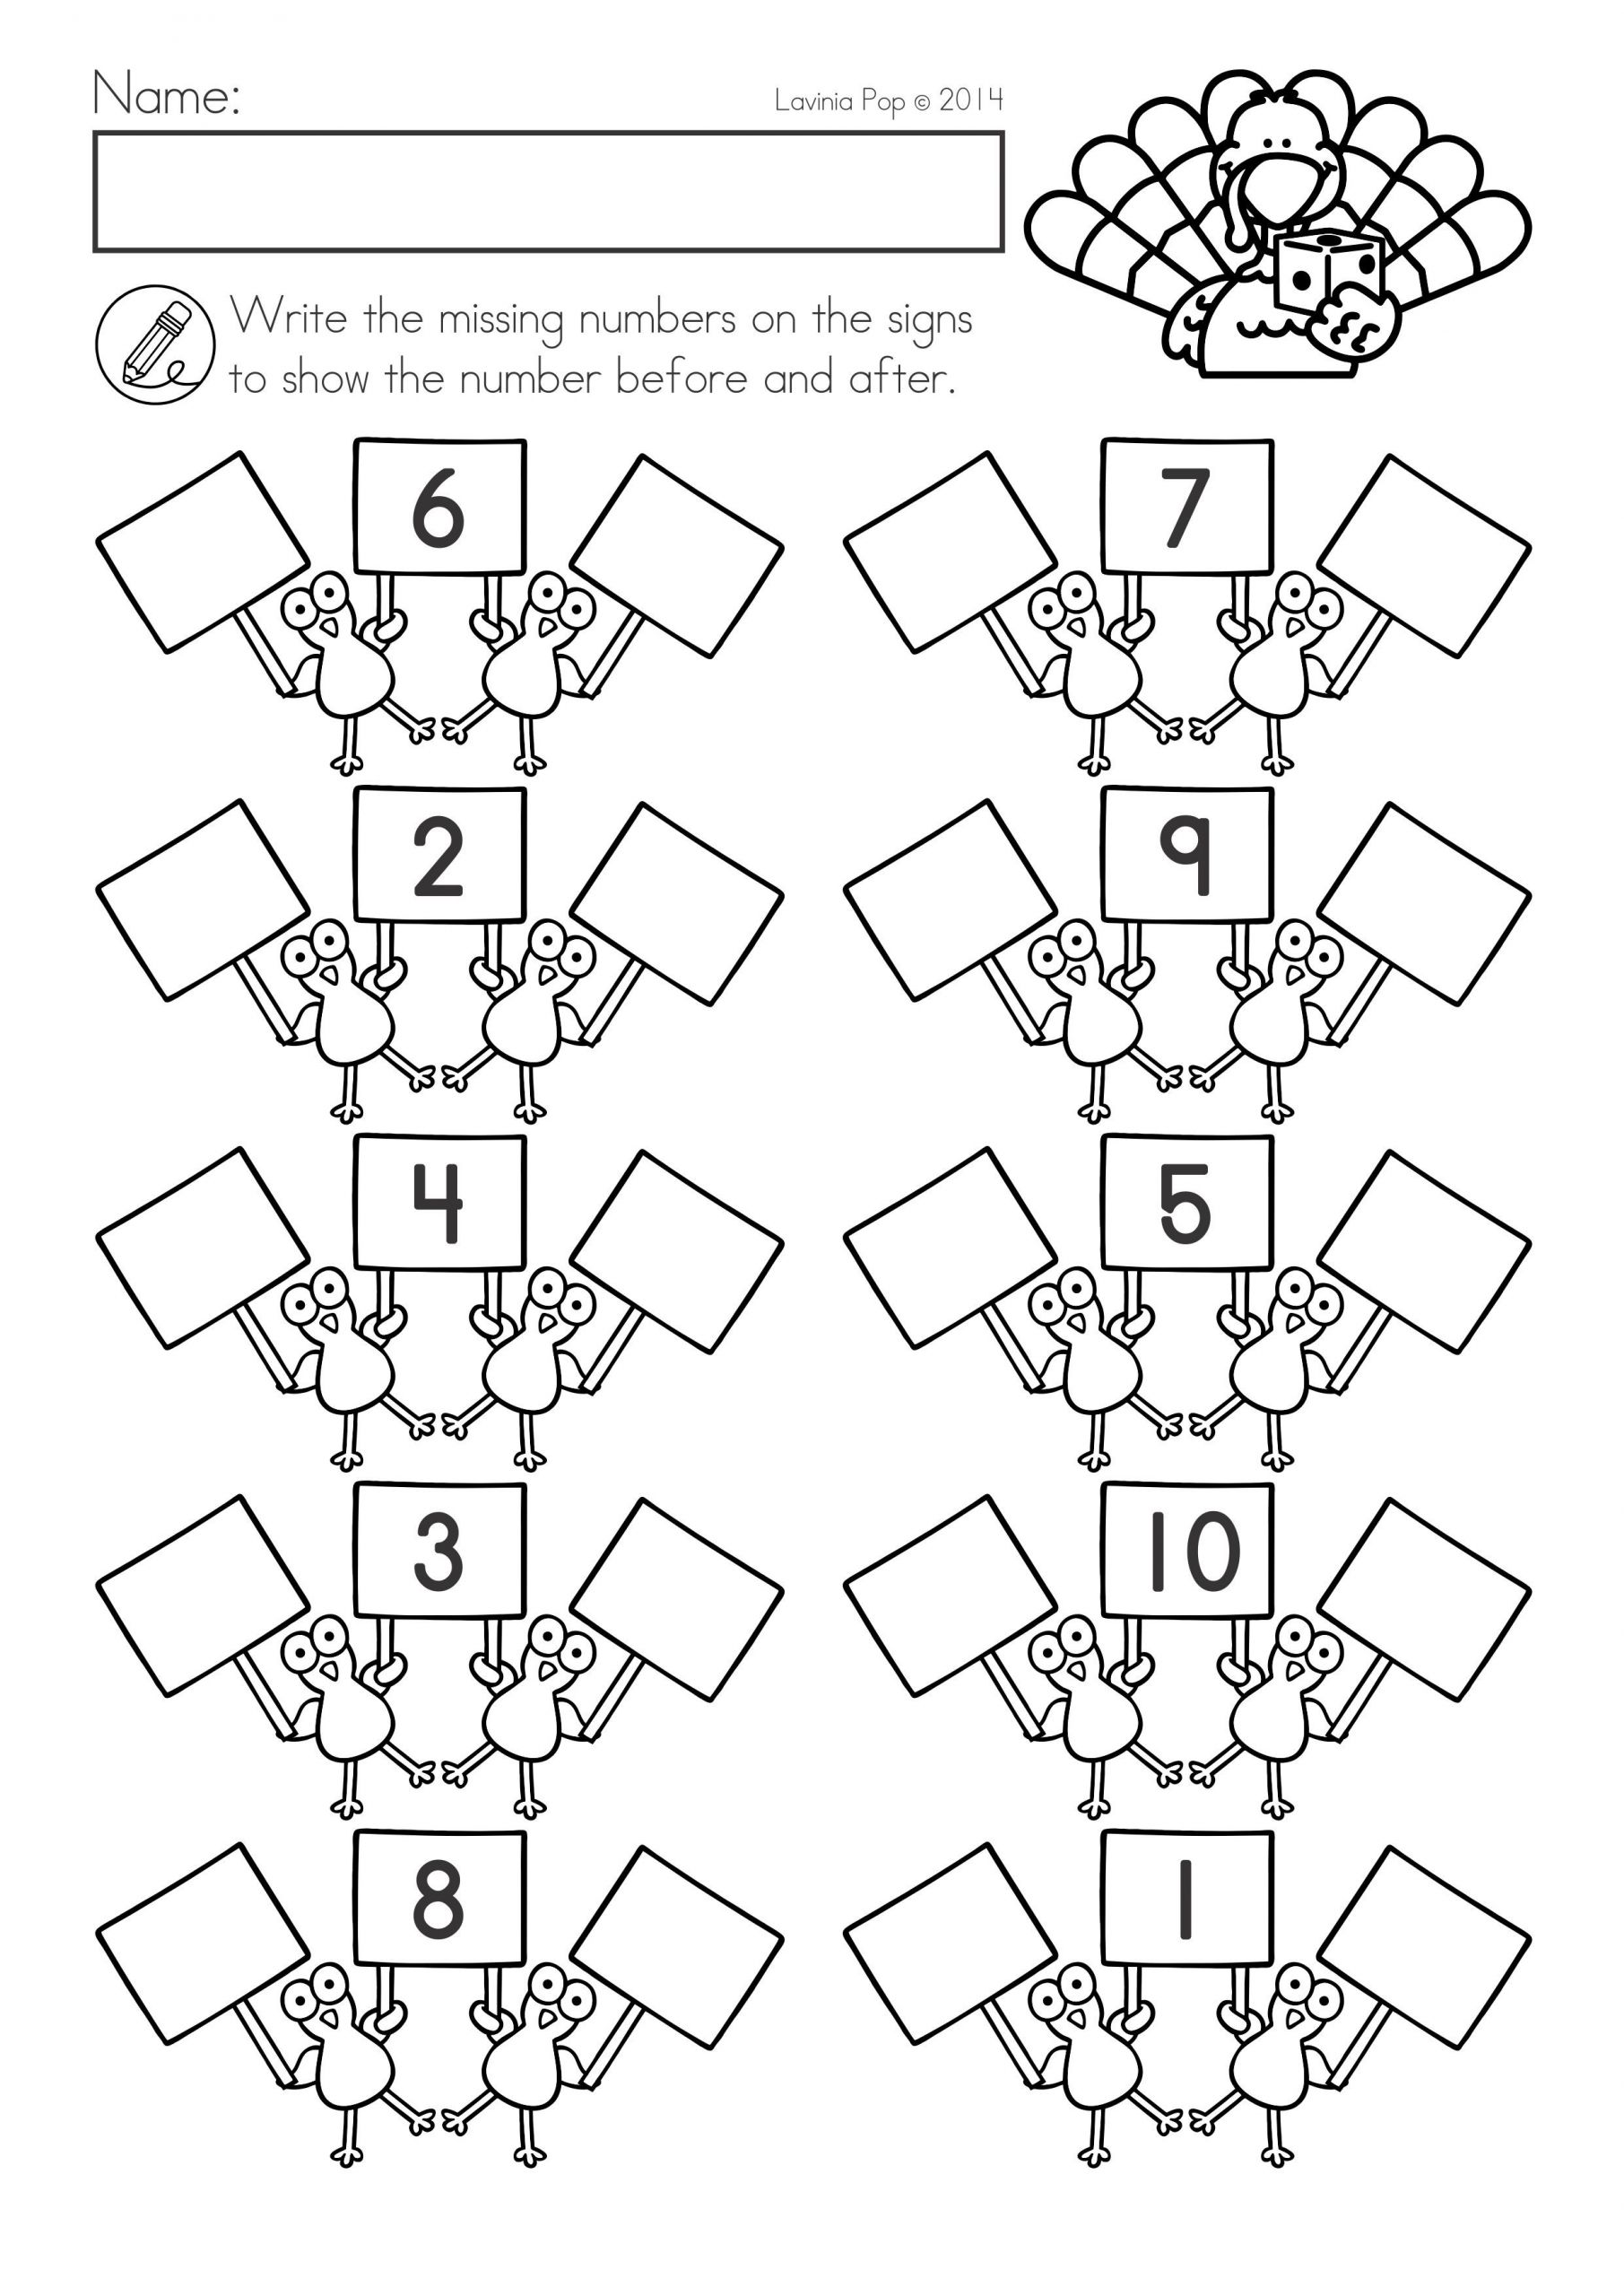 Free Math Worksheets First Grade 1 Addition Adding Two Single Digit Numbers Sum 20 or Less